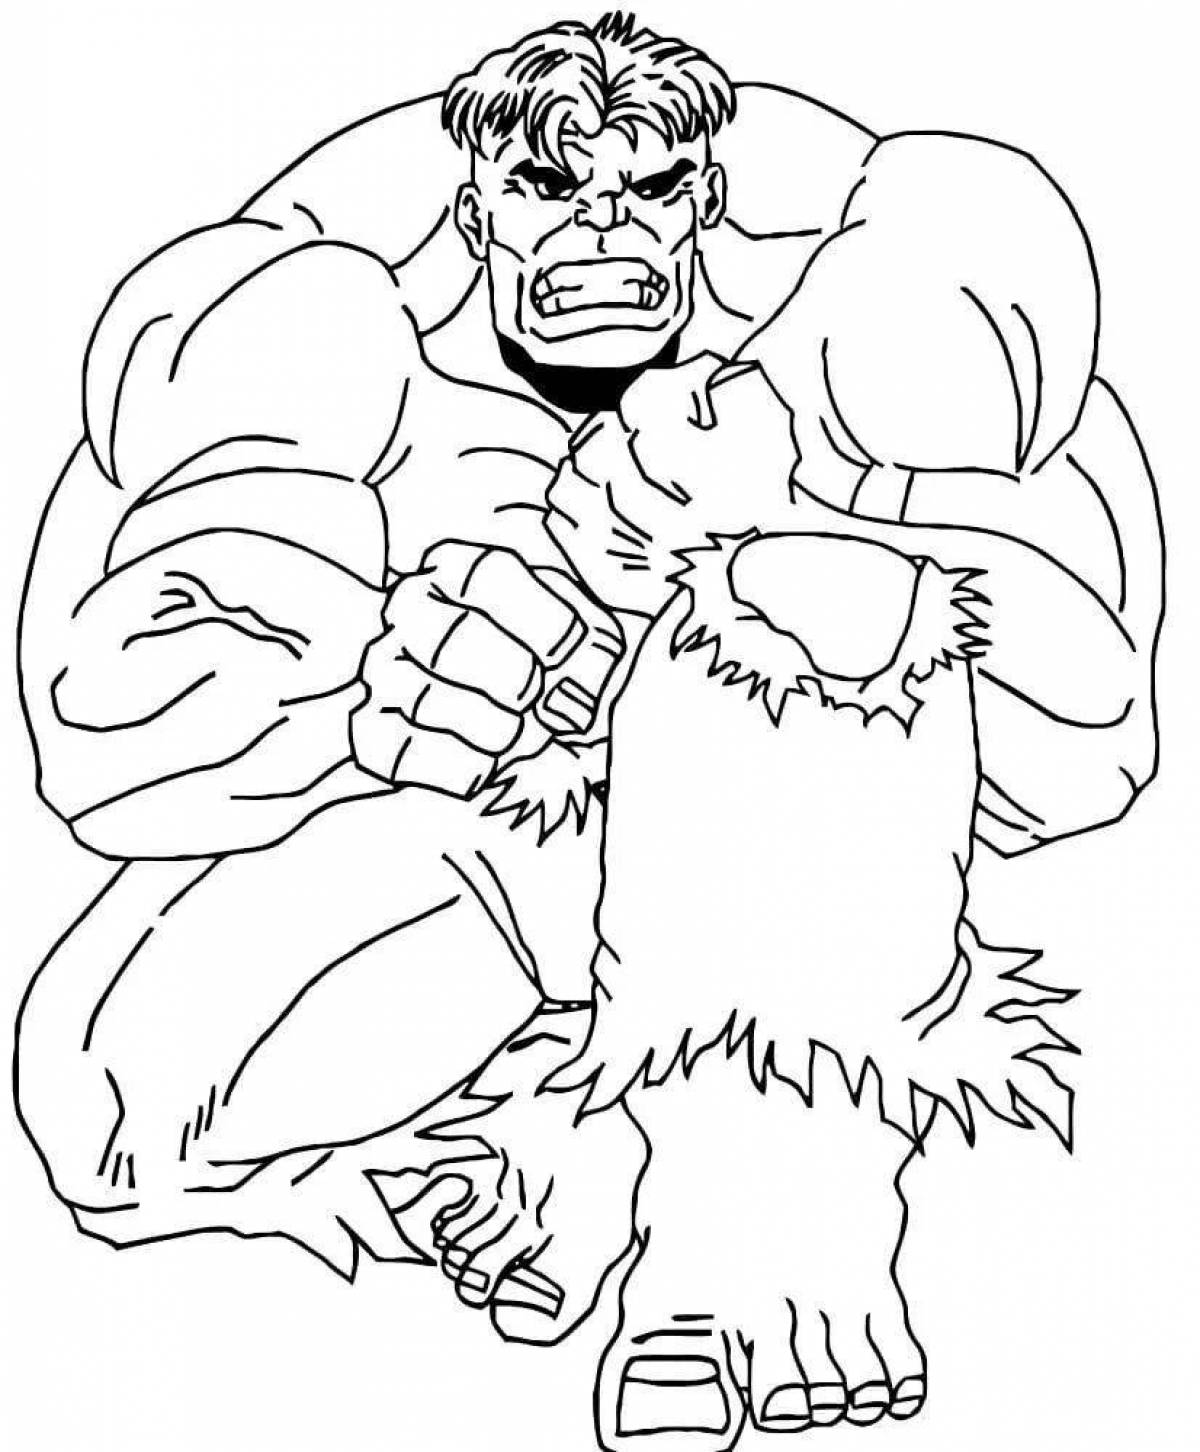 Amazing superhero coloring pages for kids 6-7 years old